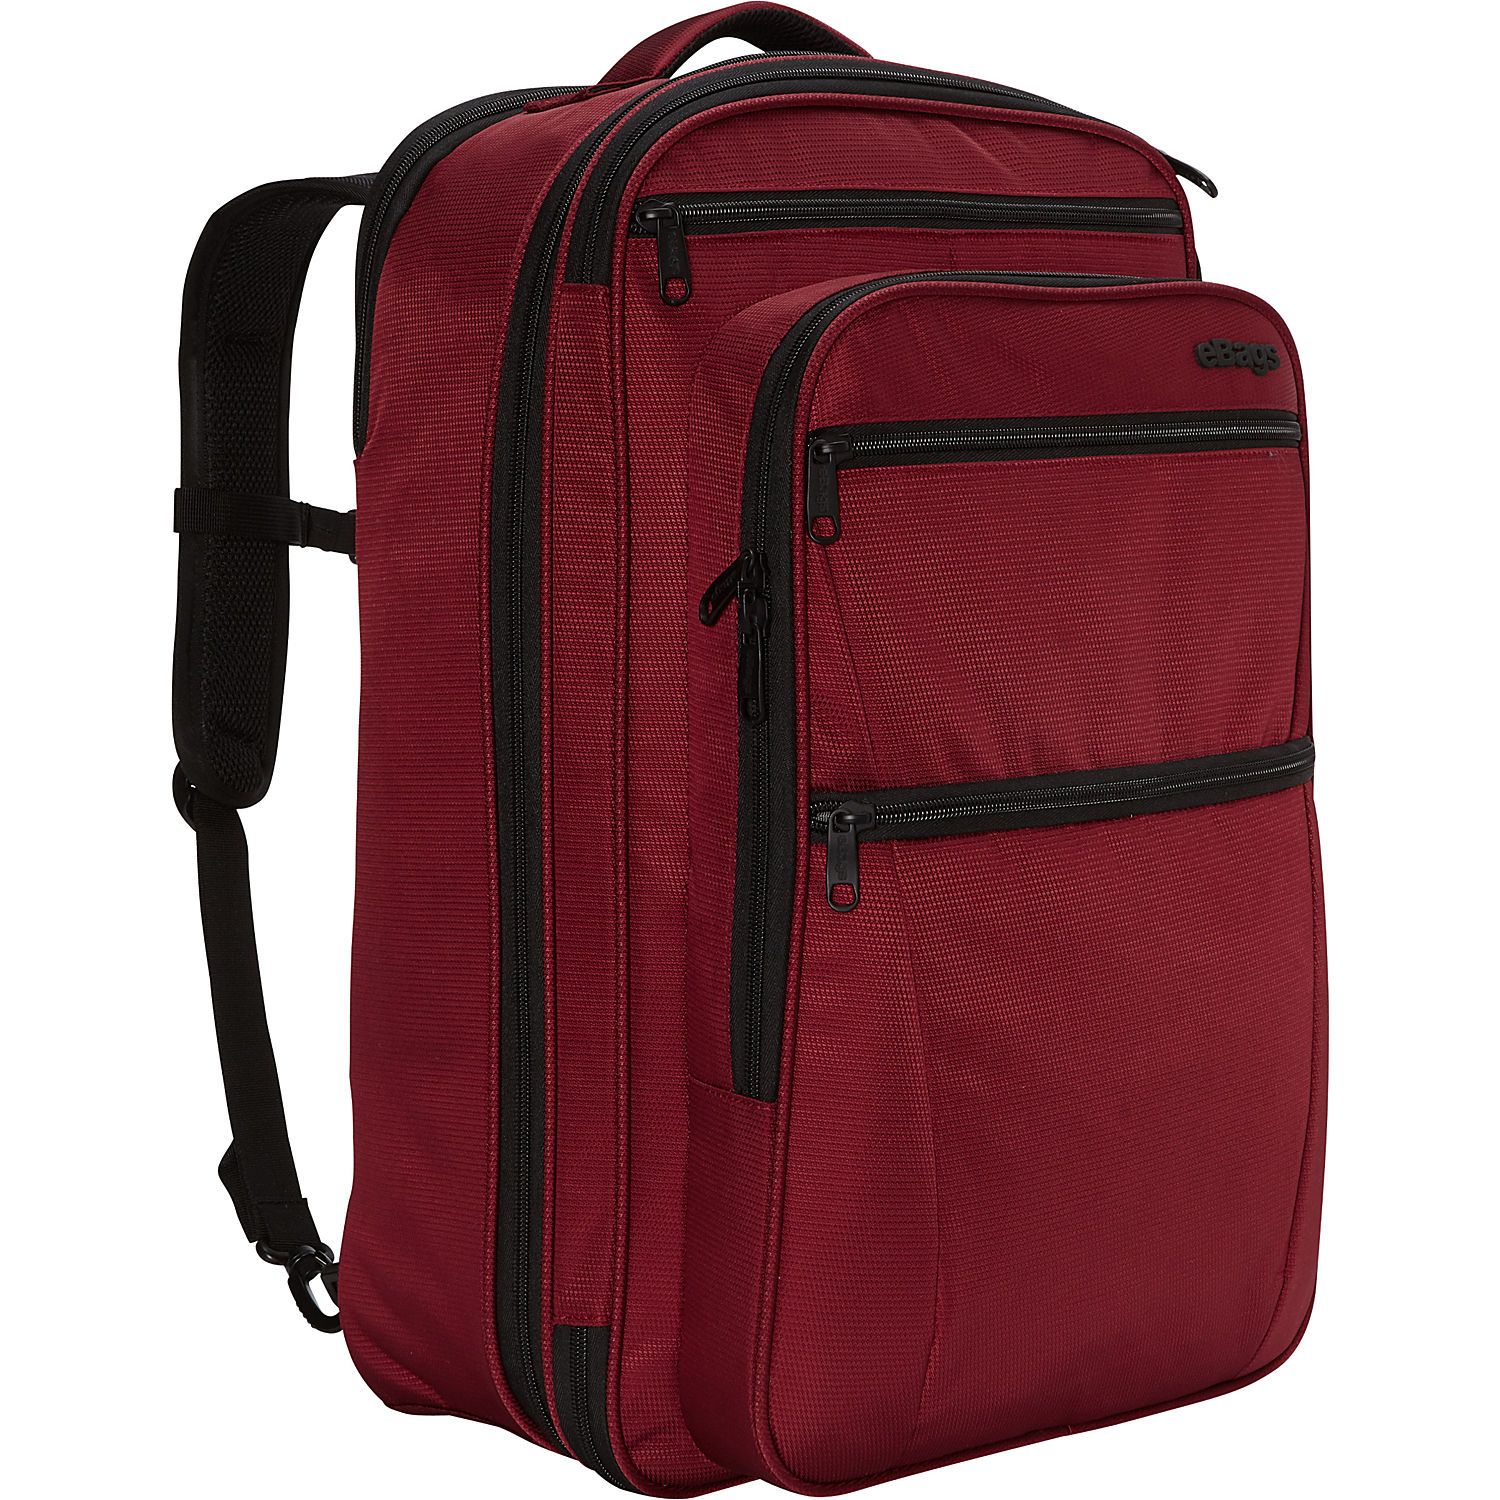 eTech Carry-on Travel Backpack